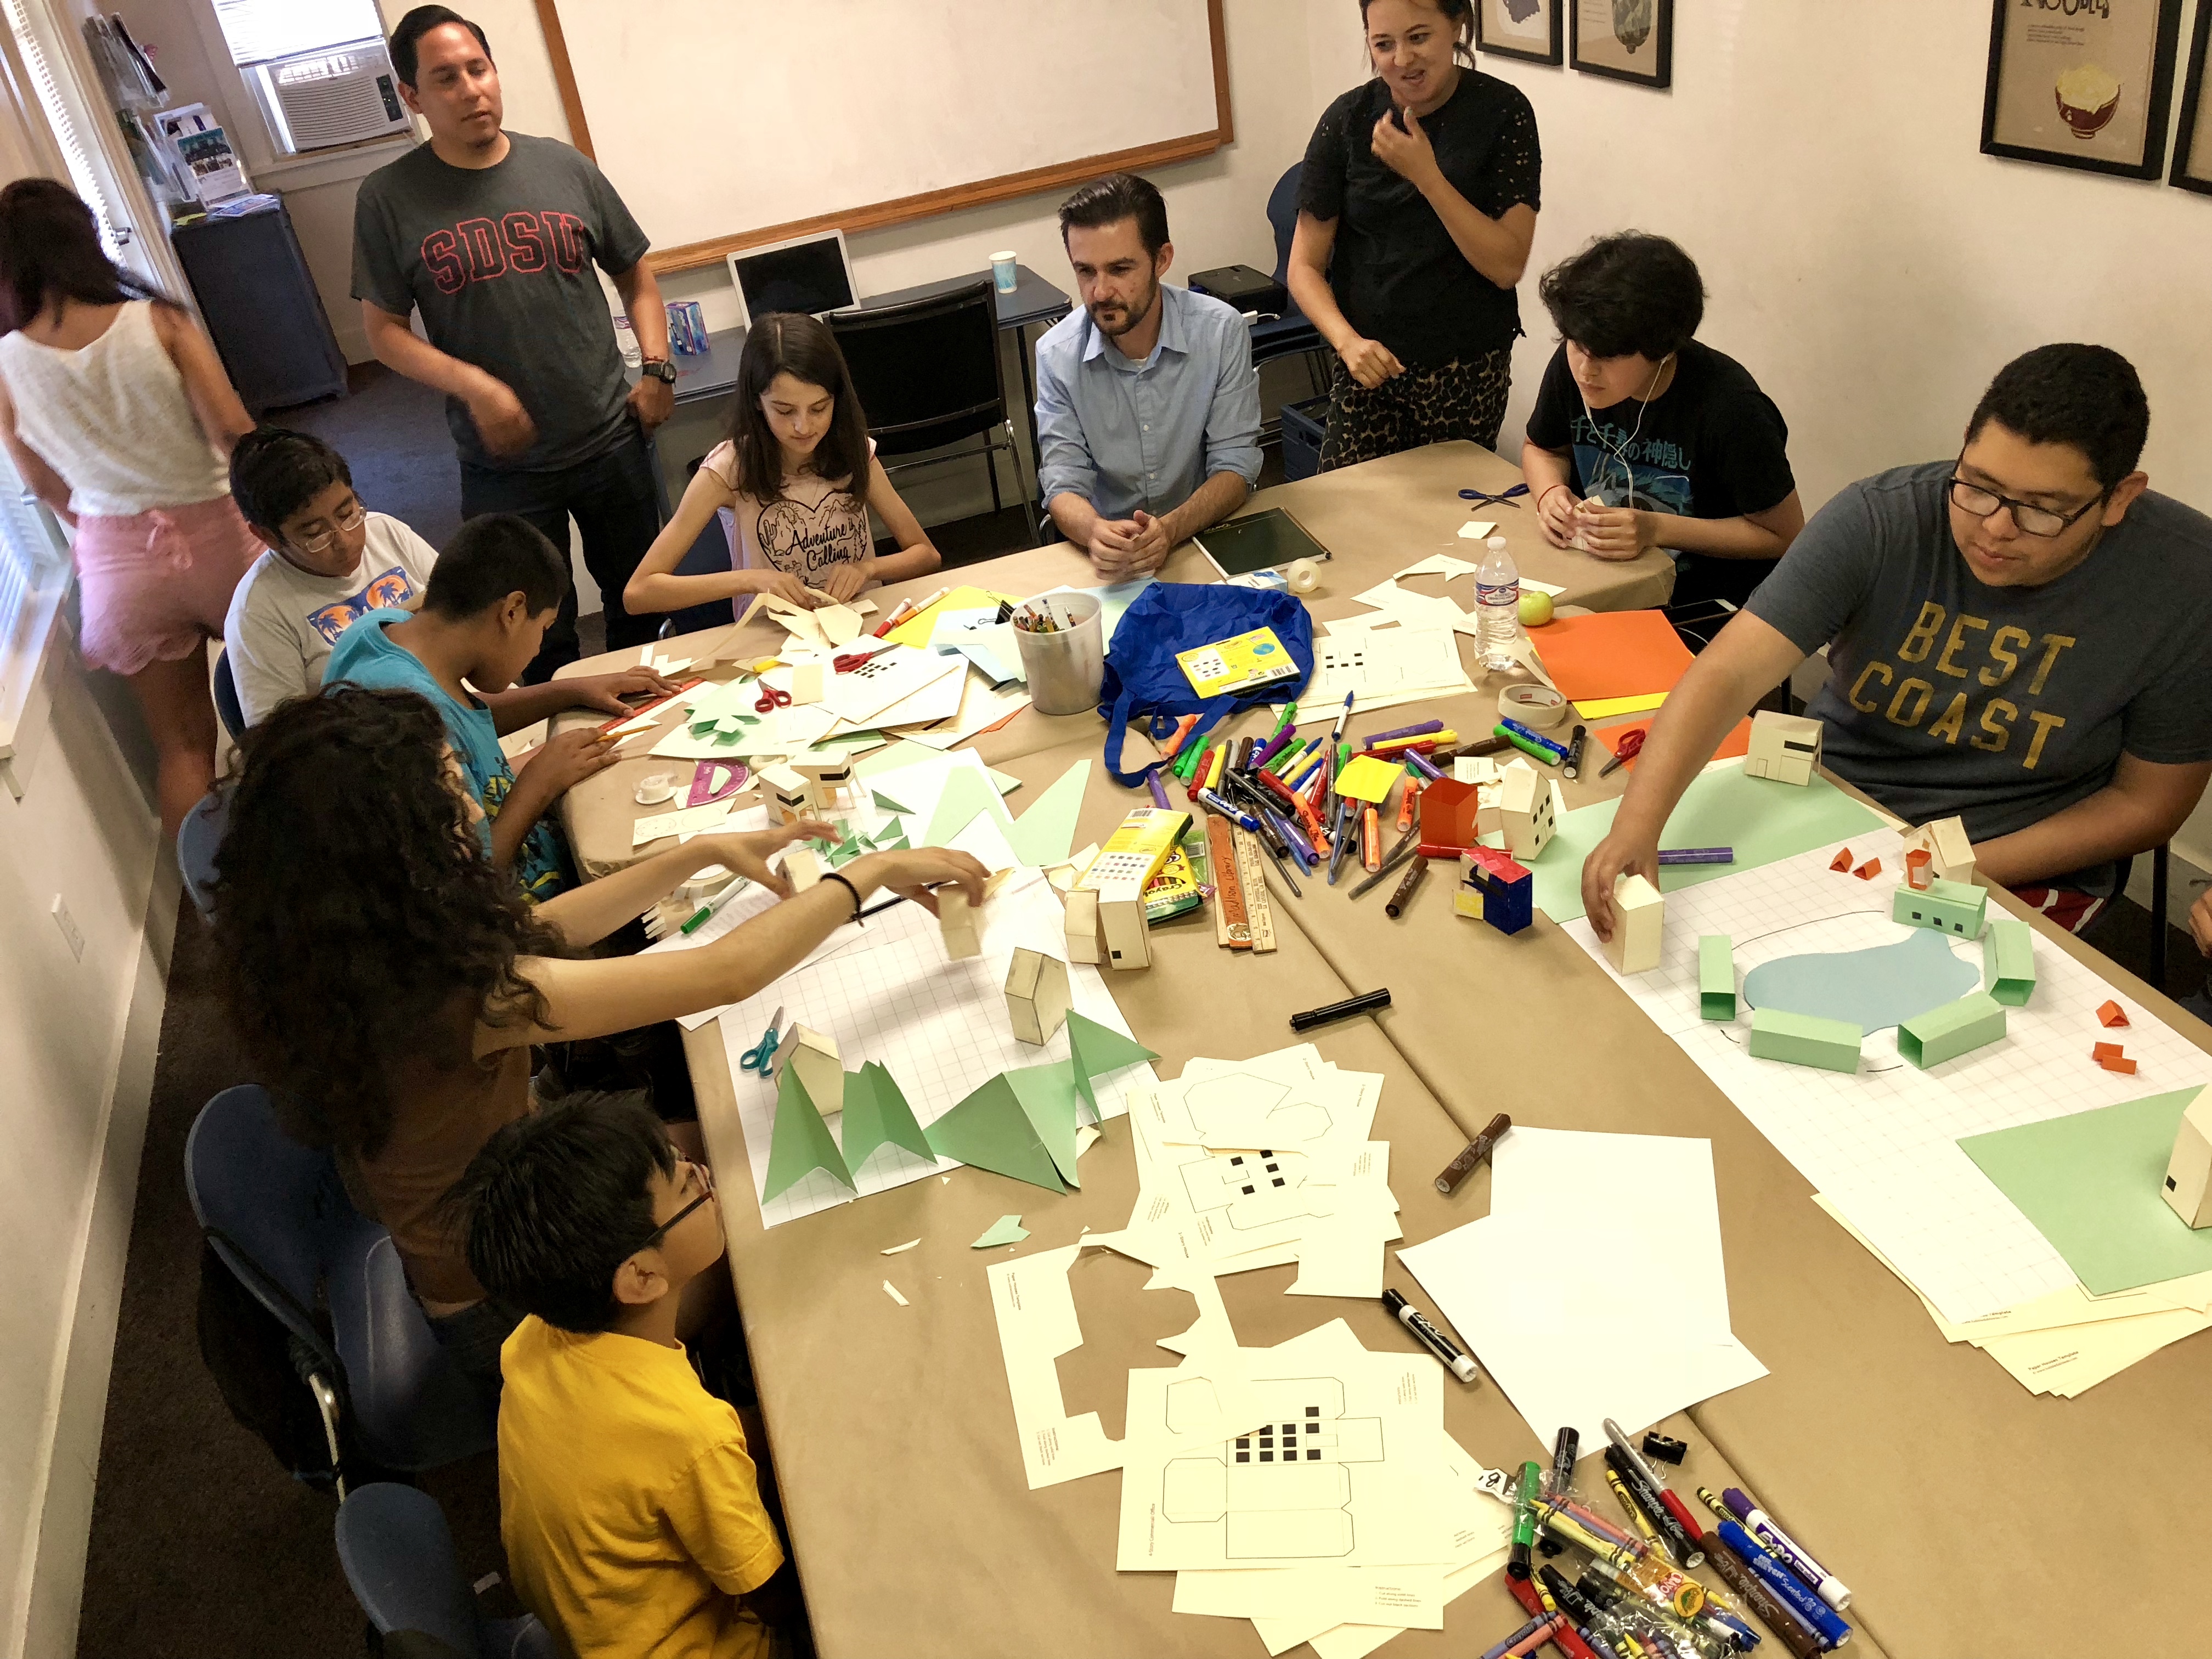 A group from Adelante Youth Alliance designing their dream City of Pasadena